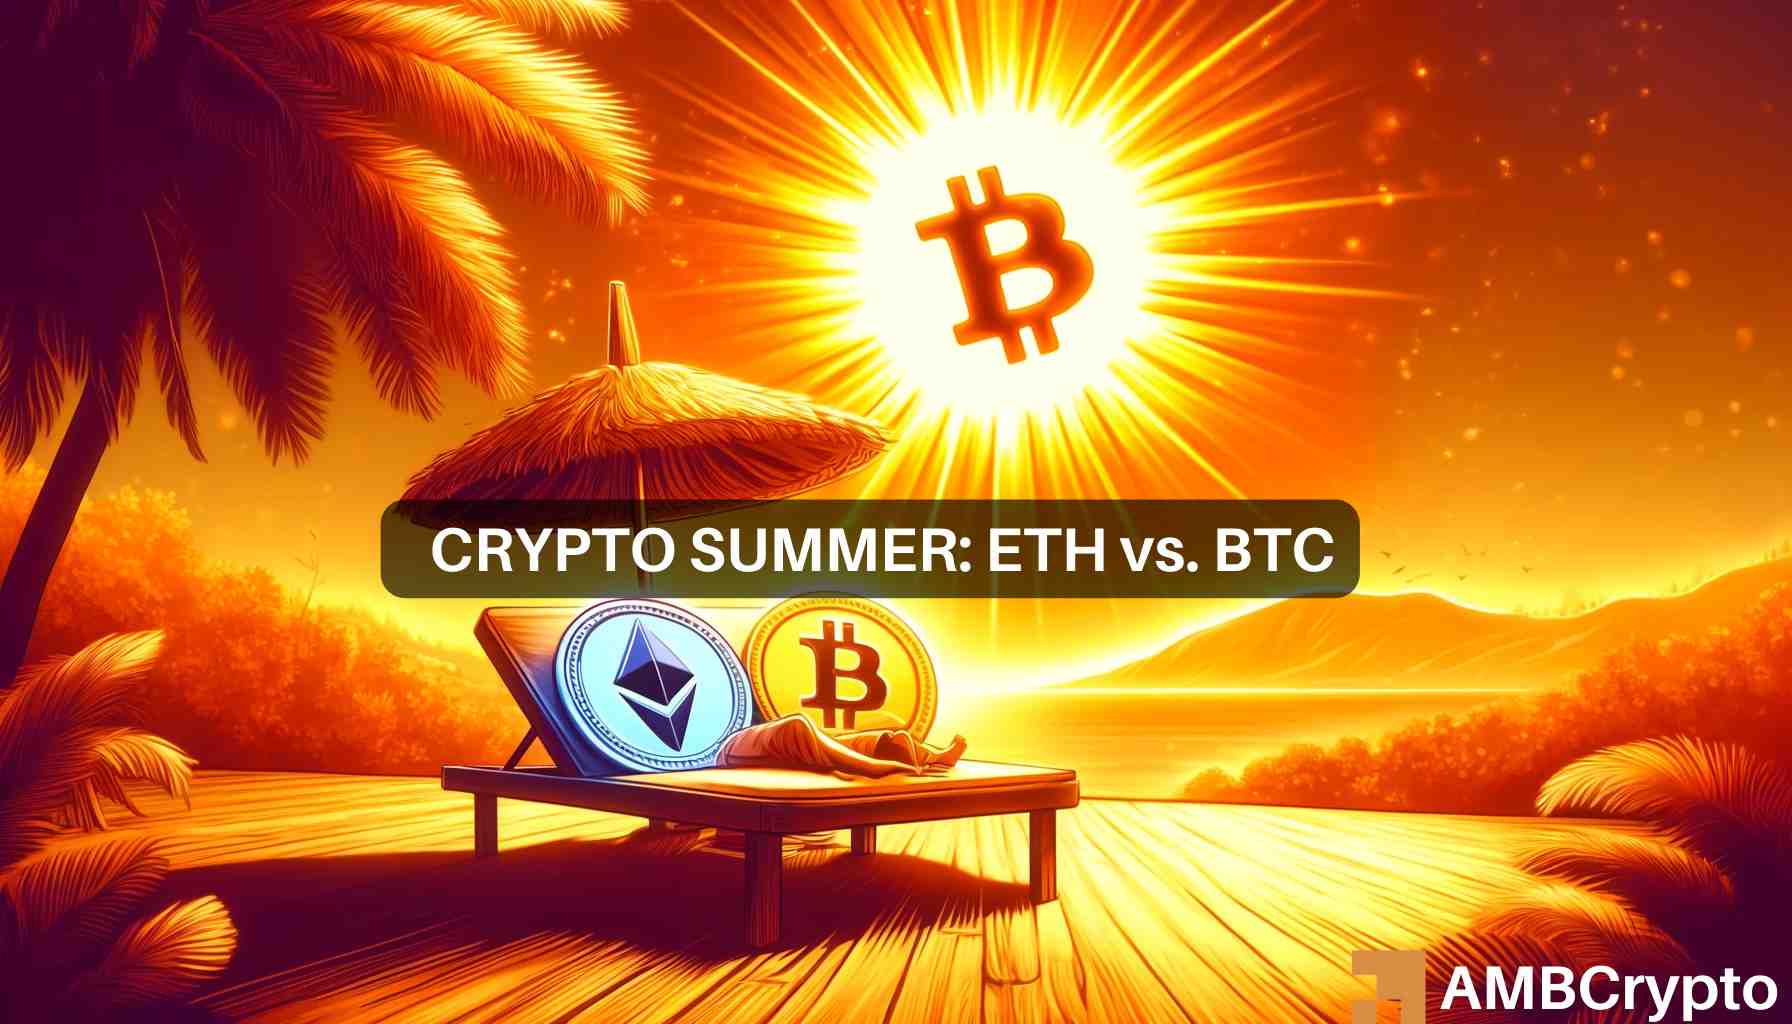 Ethereum to outshine Bitcoin this summer? Raoul Pal’s bold prediction